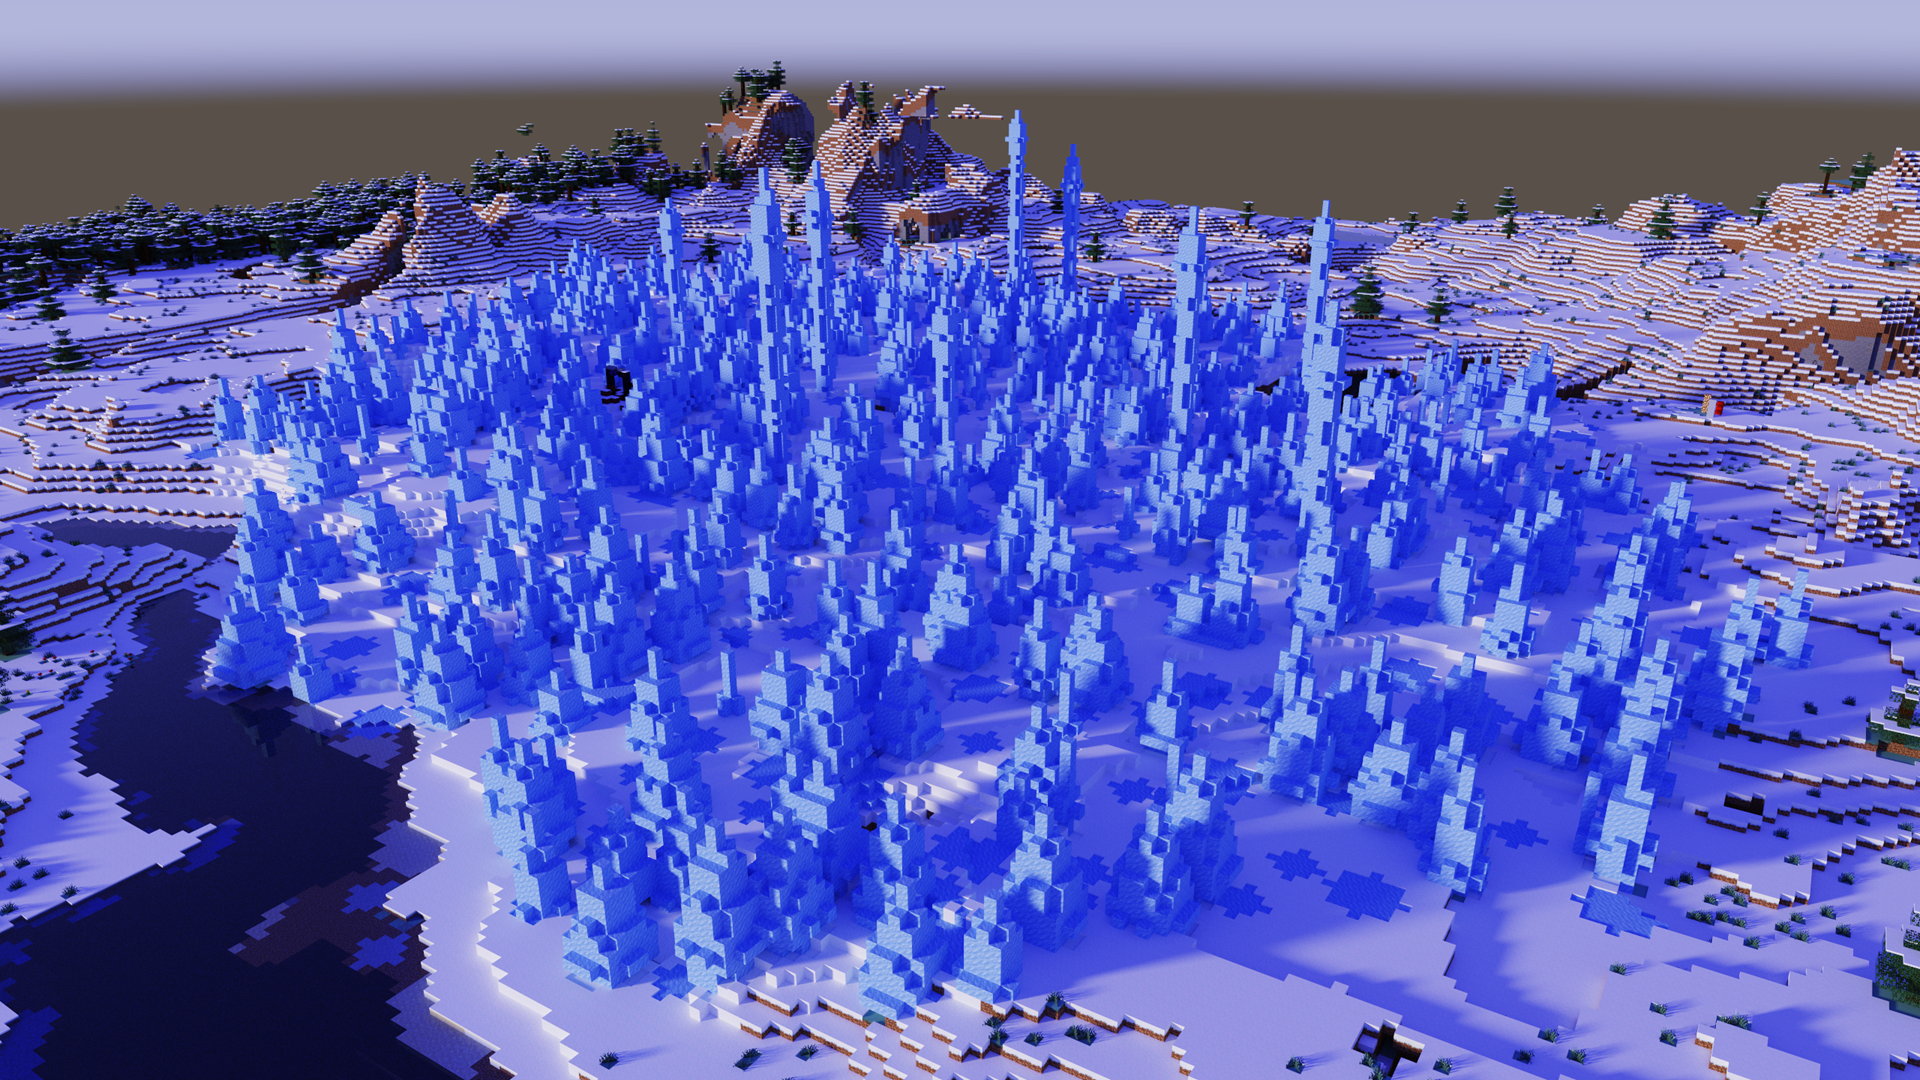 An ice spikes biome at sunset